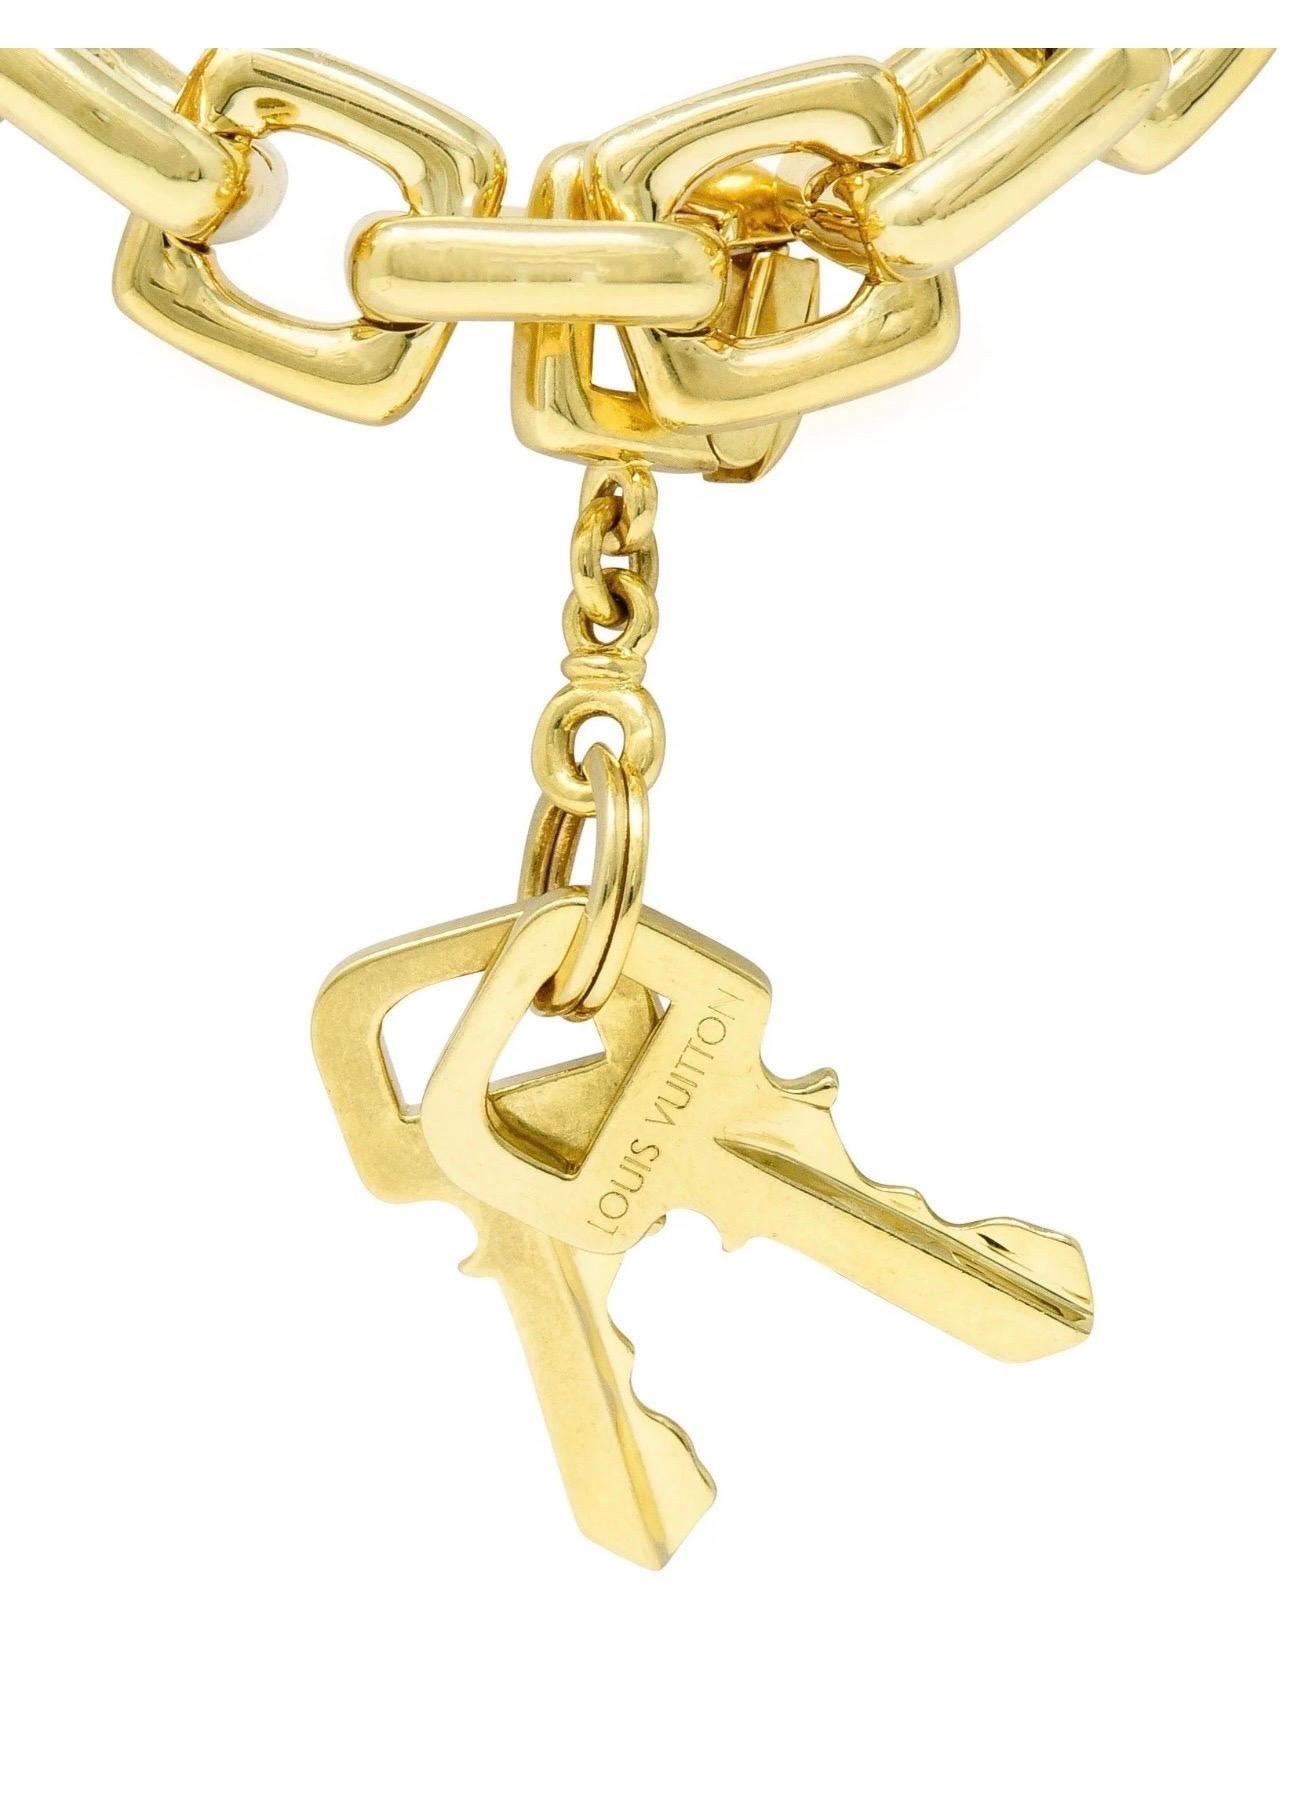 Louis Vuitton Padlock & Keys+ Two Bags Charm Yellow Gold Bracelet 125.7 Gm 18 KG In Excellent Condition For Sale In New York, NY